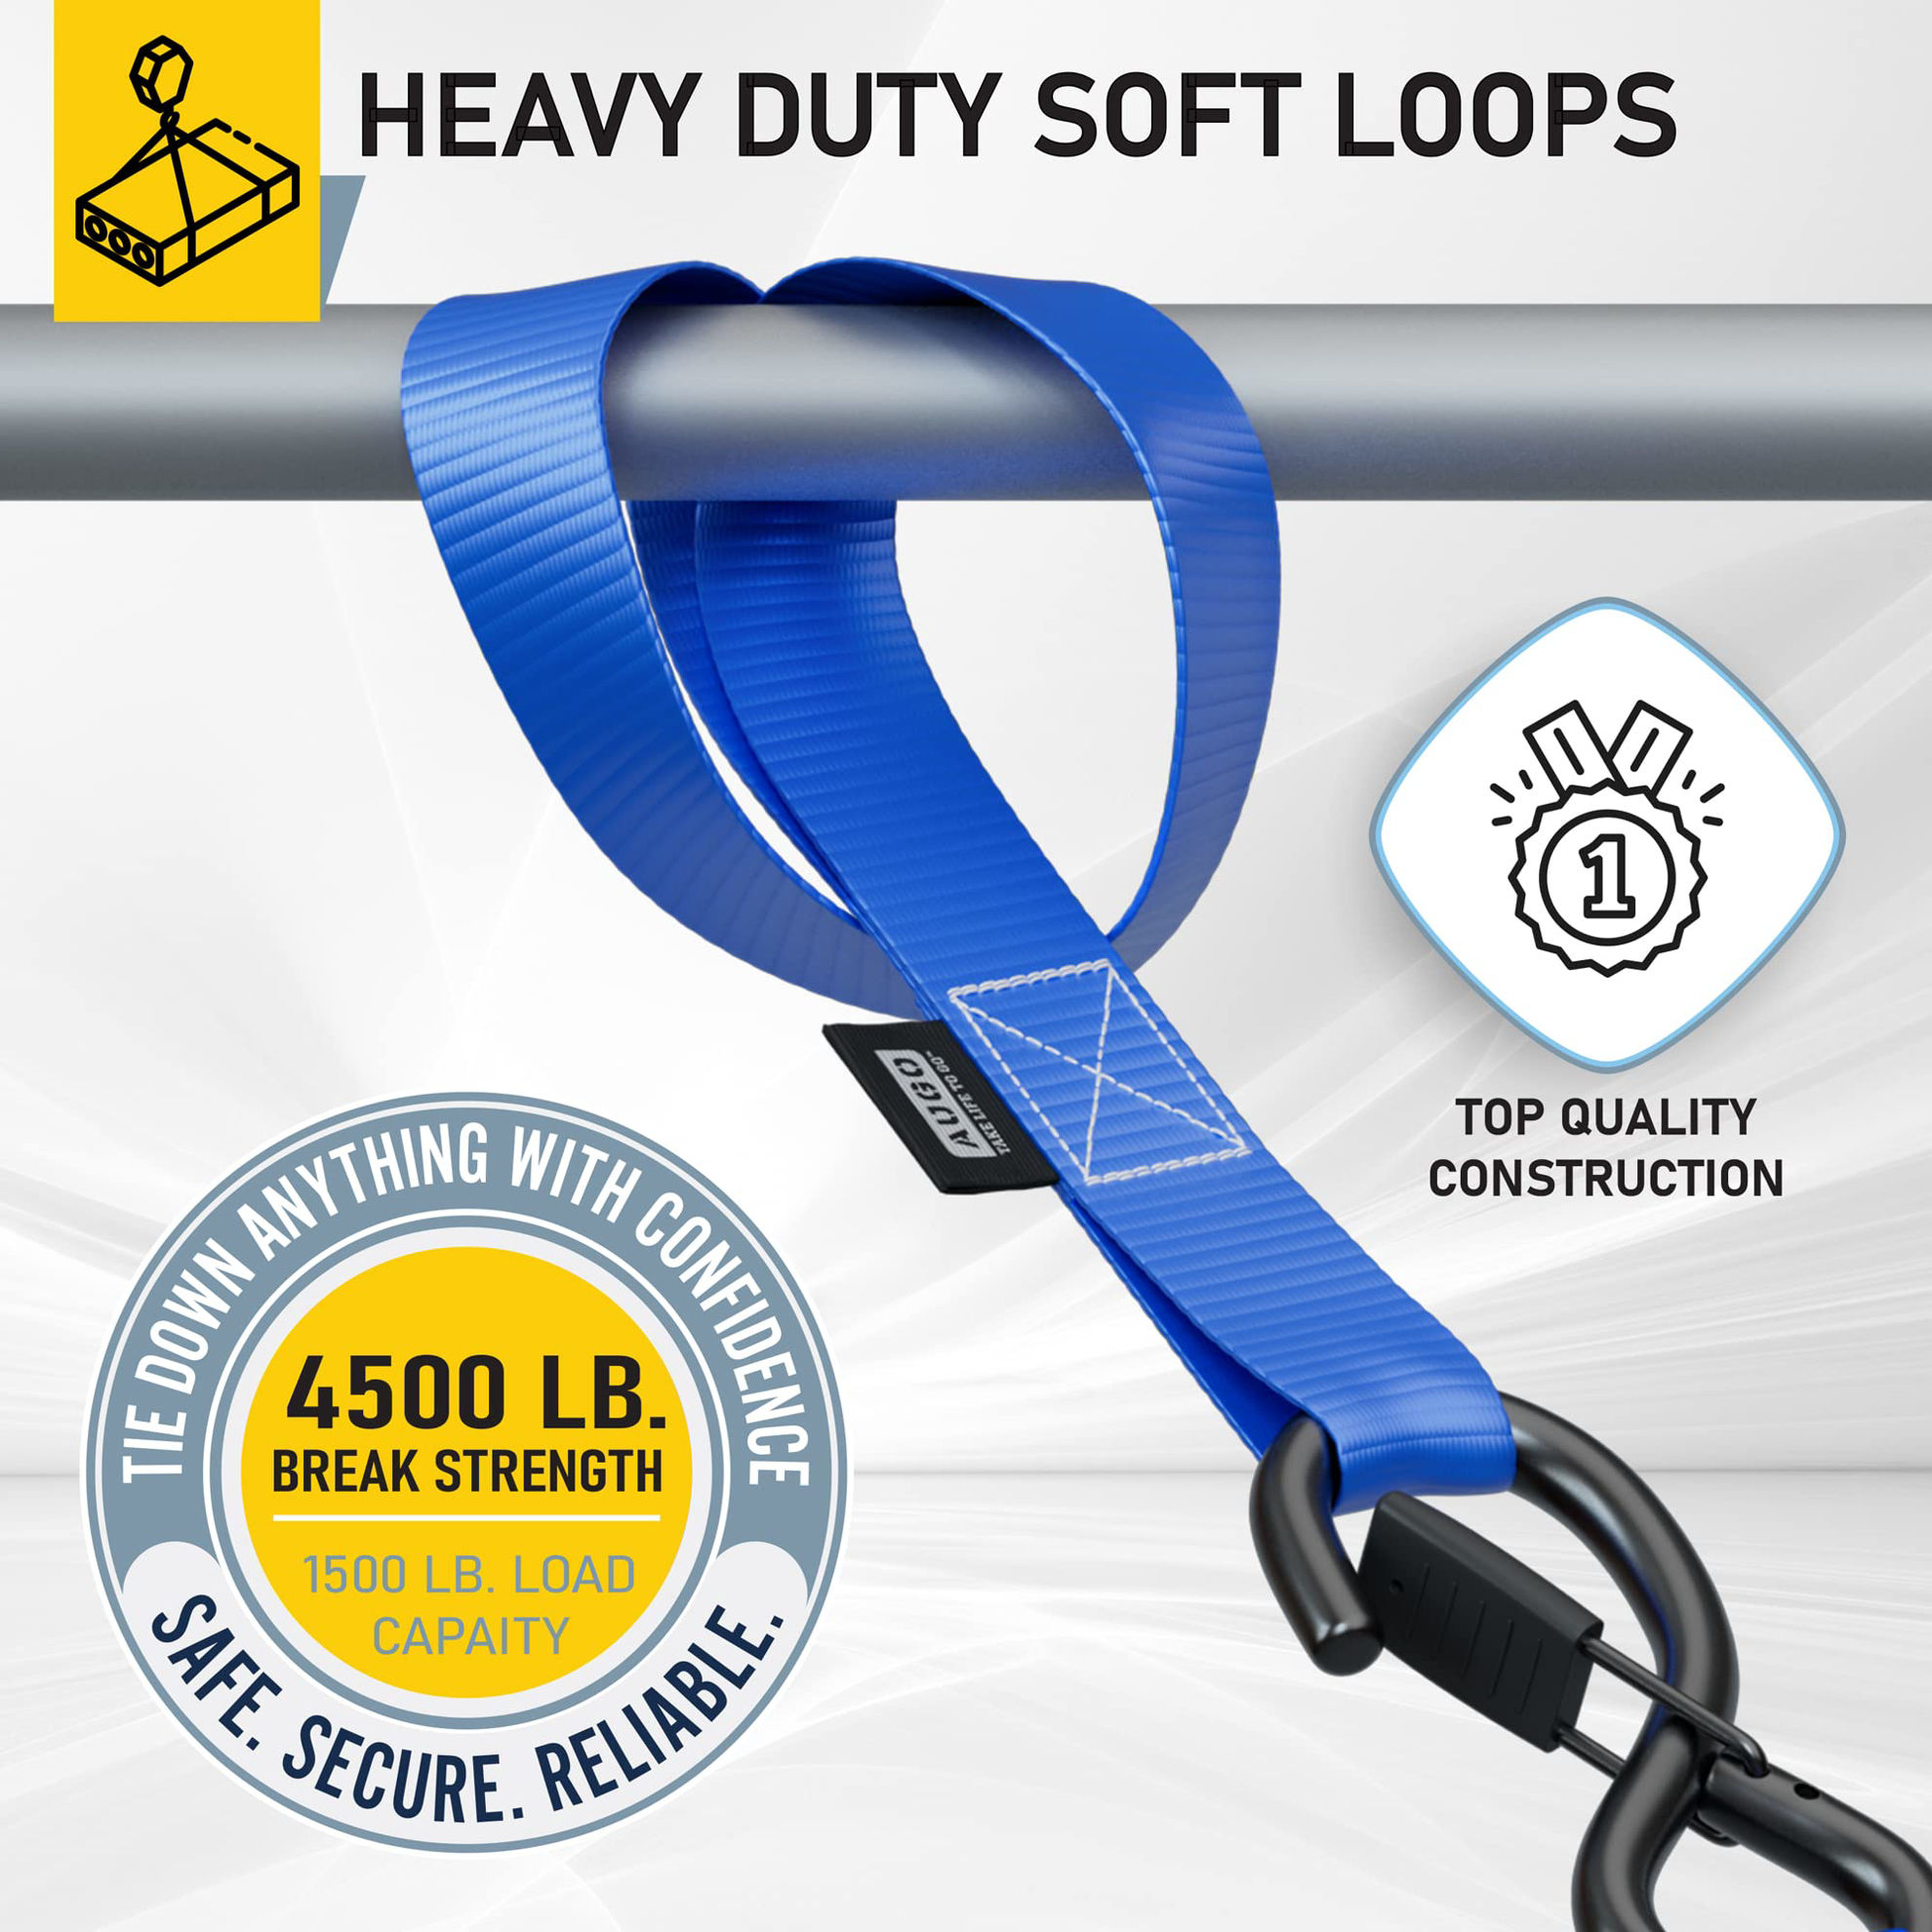 Getuscart Soft Loop Tie Down Straps 1500 Load Capacity And 4500 Lbs Breaking Strength 6